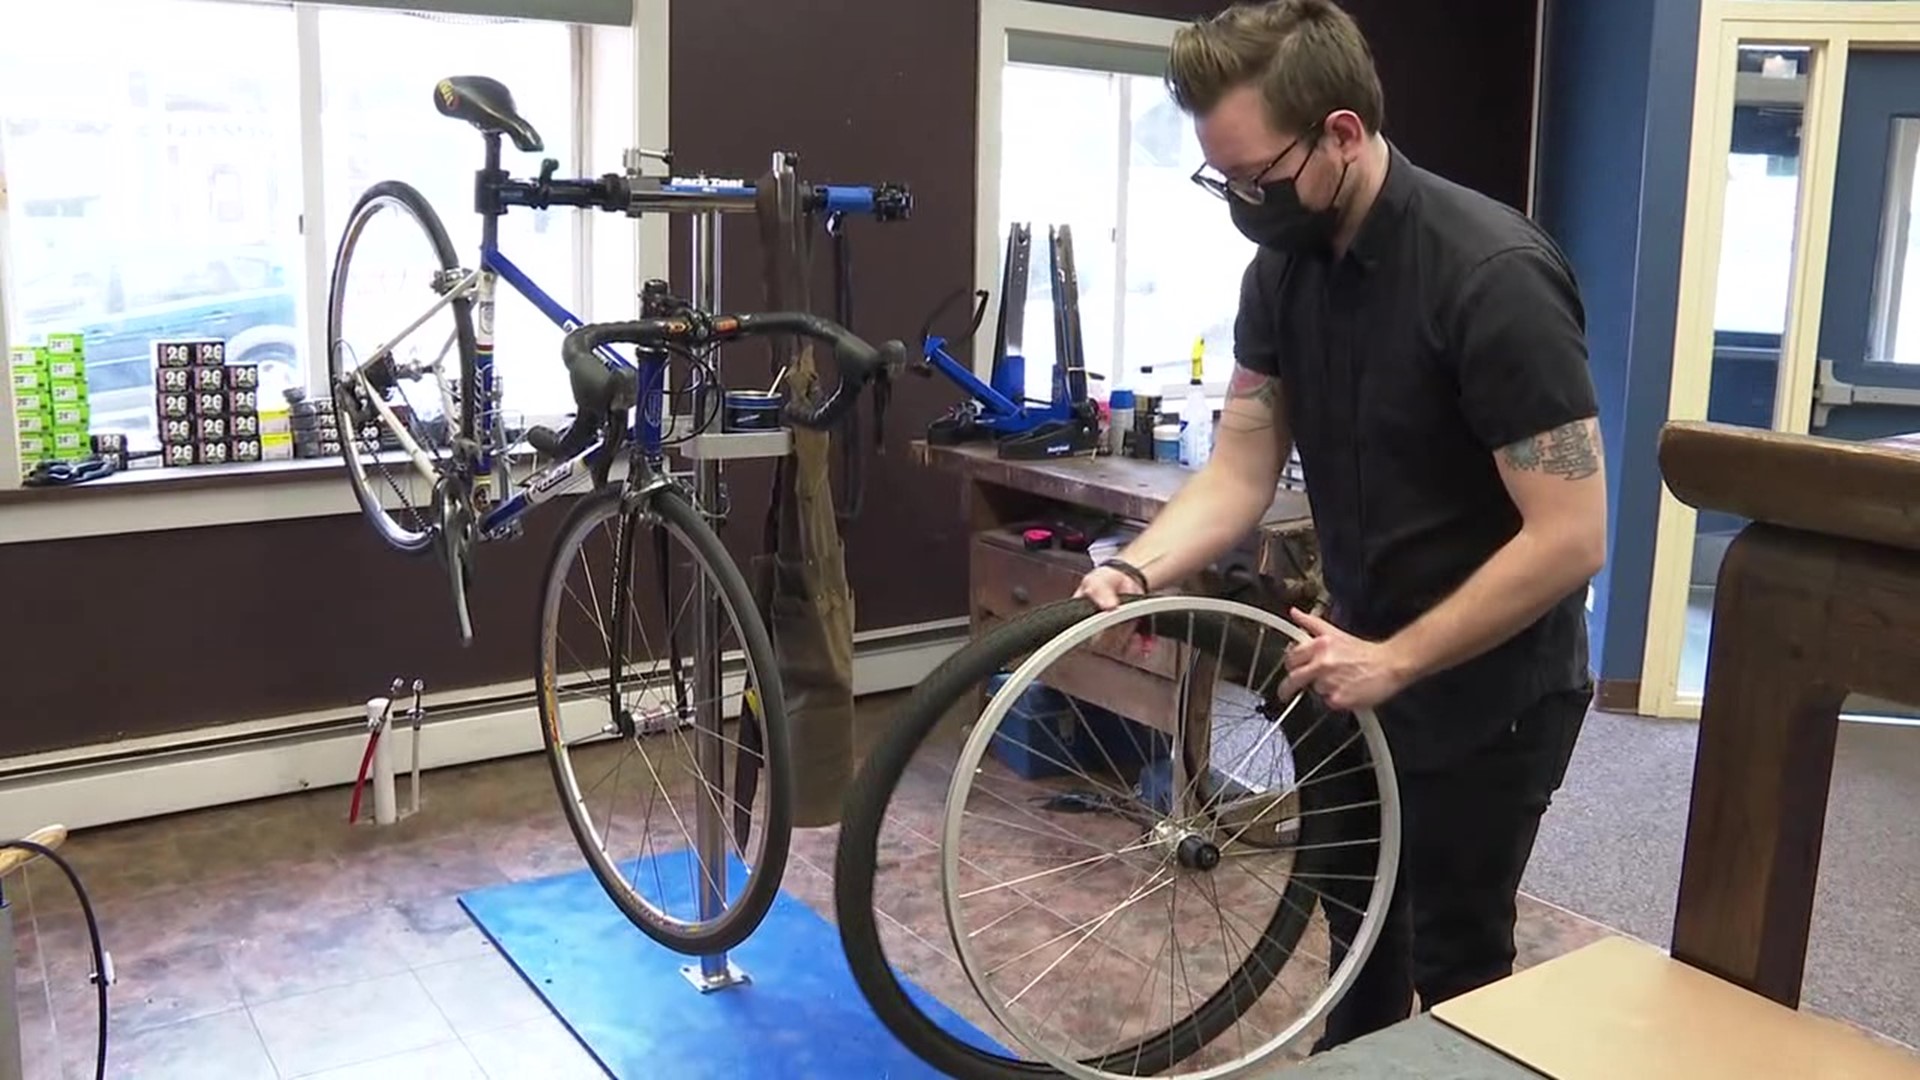 Newswatch 16's Marshall Keely explains the owner's plan to gain traction as production issues in the industry have made bikes hard to come by.